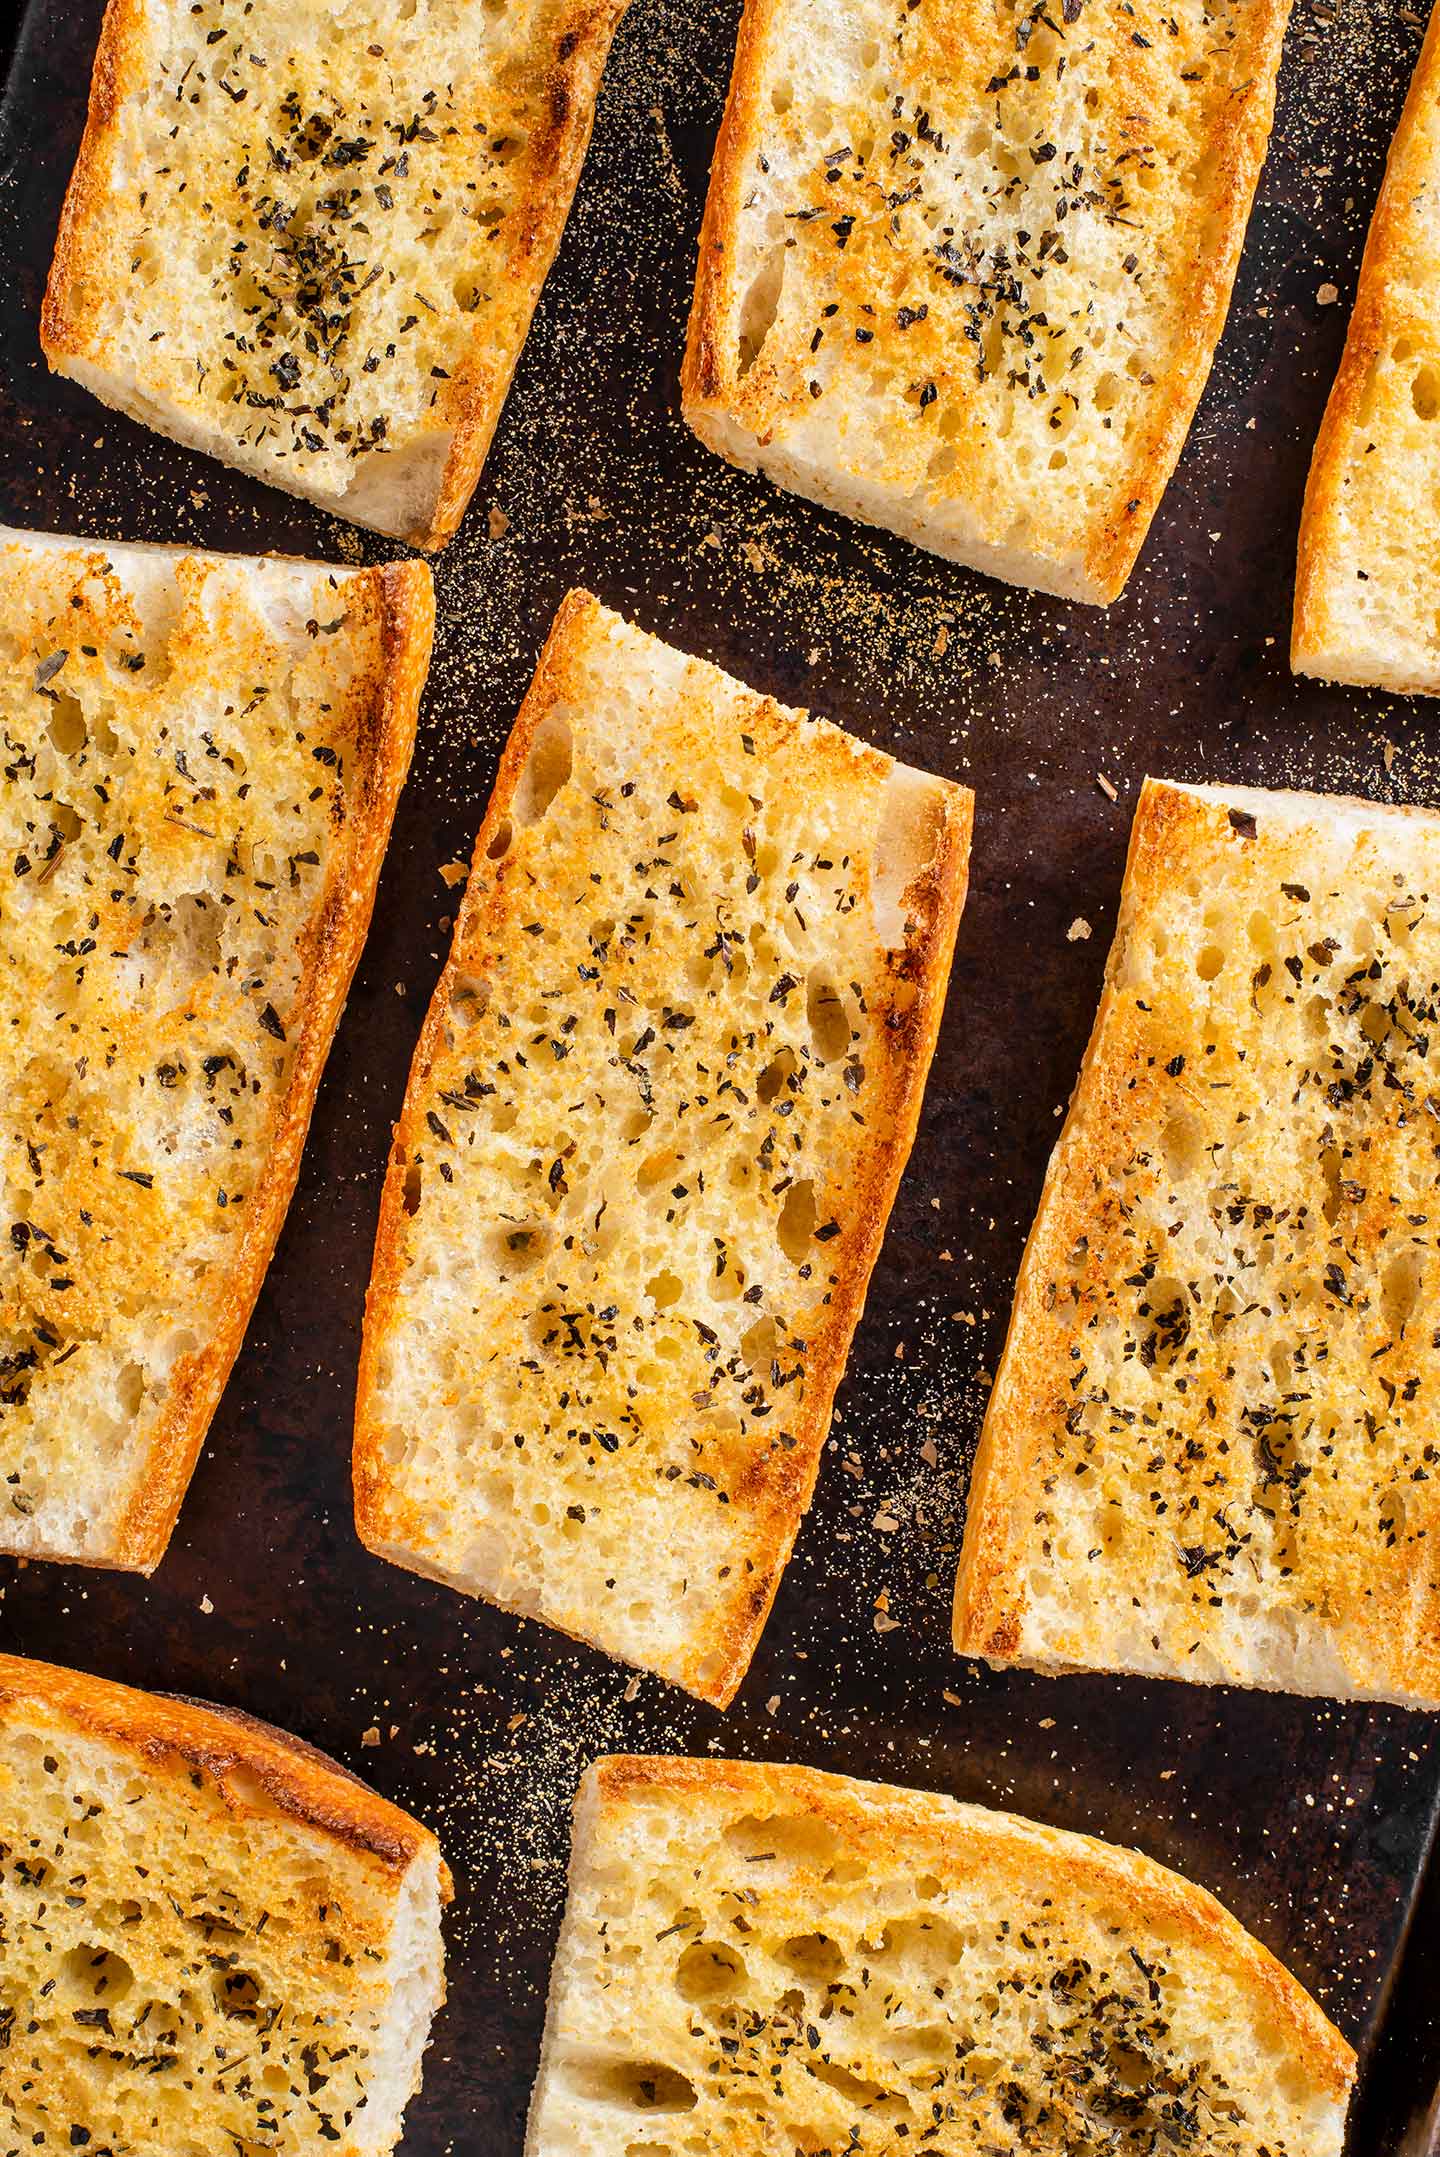 Top down view of toasted garlic bread on a baking sheet. The bread is golden with melted butter and sprinkled with garlic powder and dried herbs.